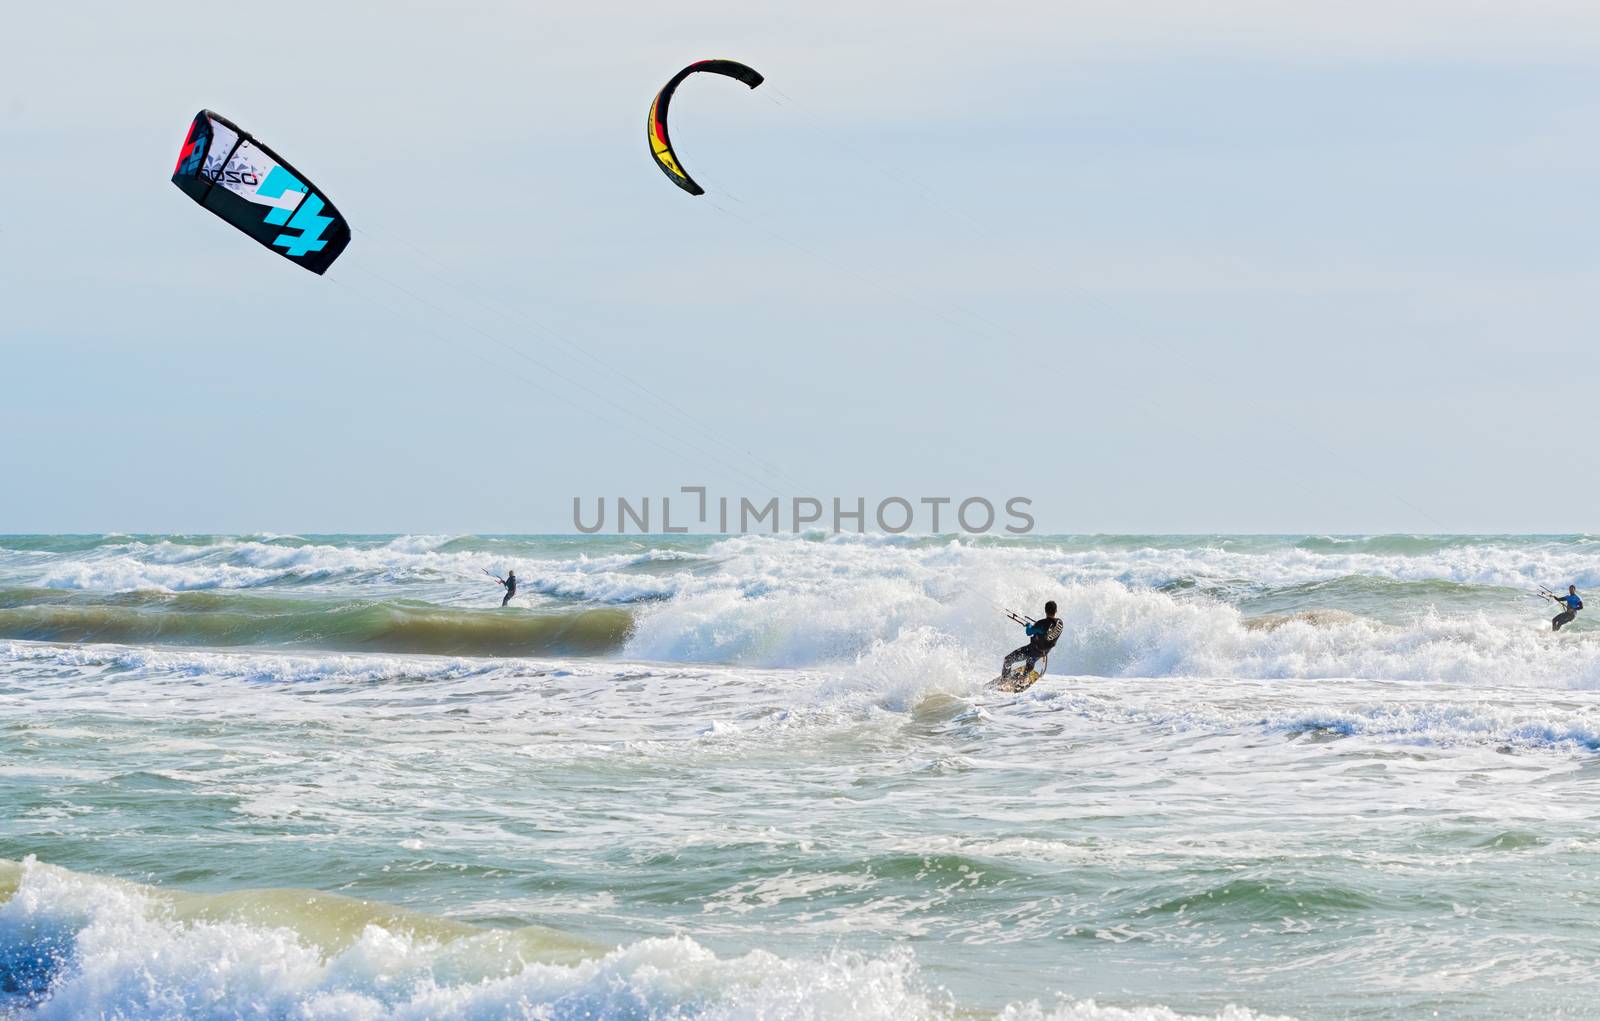 Kite surfing in Barcelona, Spain by Marcus